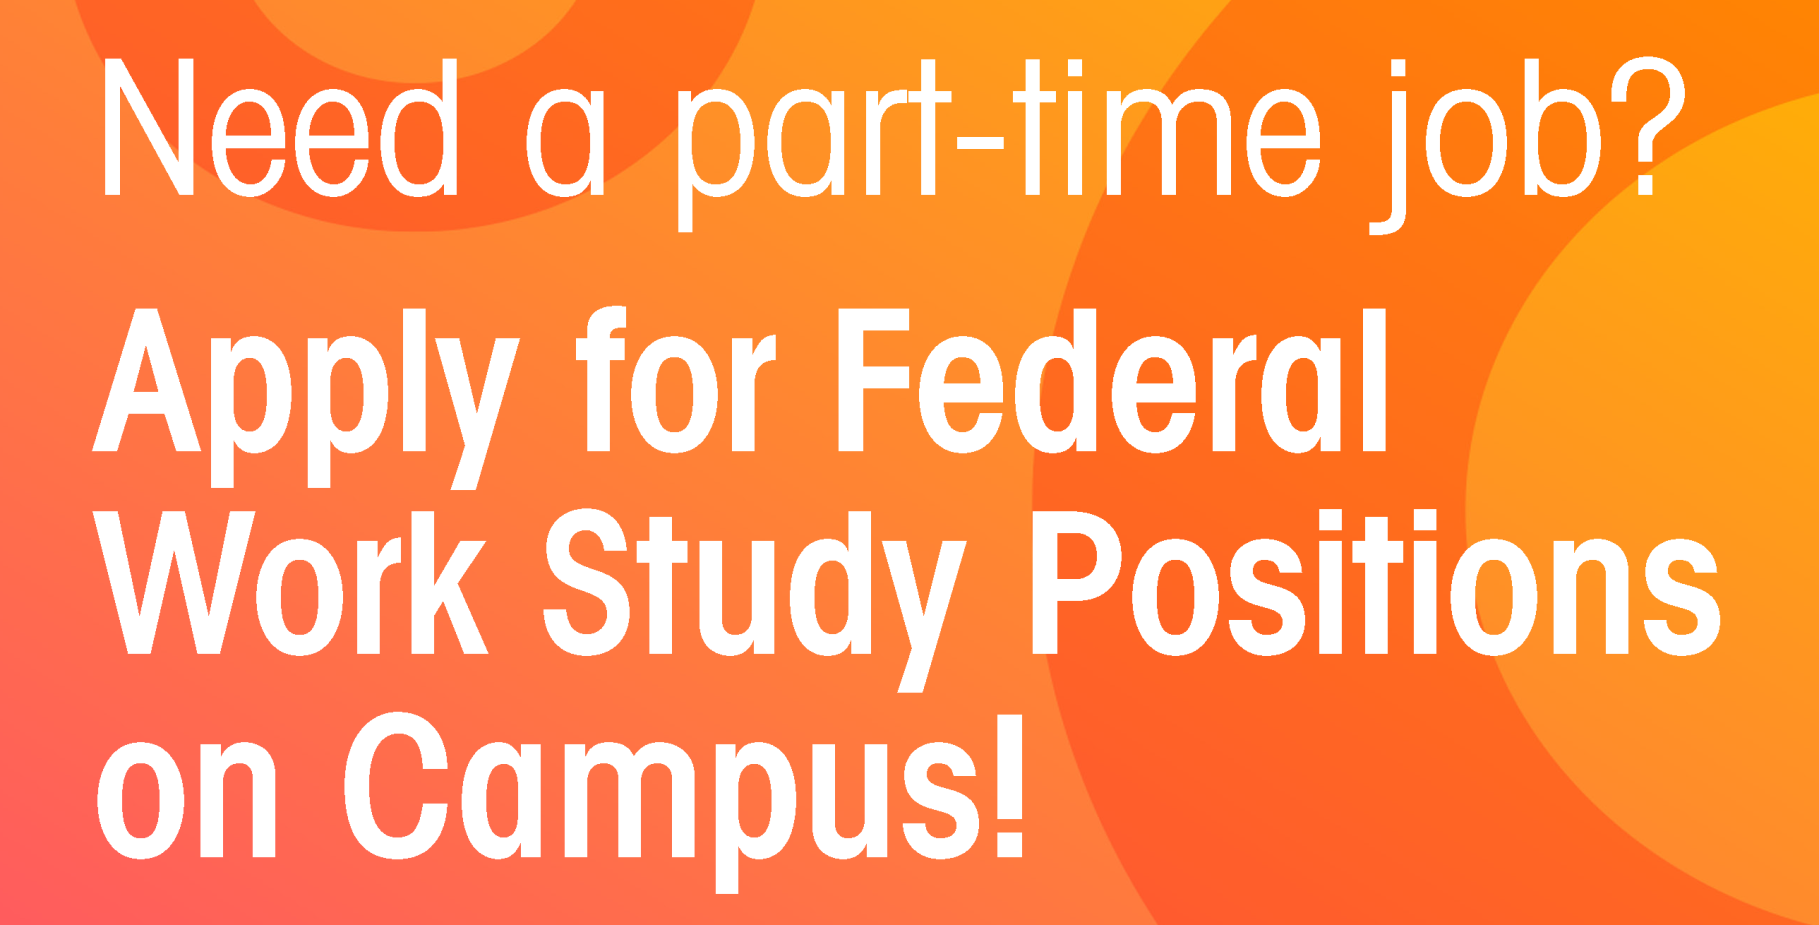        Need a part-time job?       Apply for Federal Work Study Positions on Campus!       Attendees will have the opportunity to       participate       in the following:       Be eligible for Financial Aid, Be enrolled in at least 6 units, Meet all Satisfactory Academic Progress (SAP) requirements, Apply online at: http://sbccd.org/careers. Contact the campus department if you have questions       regarding       your application.       